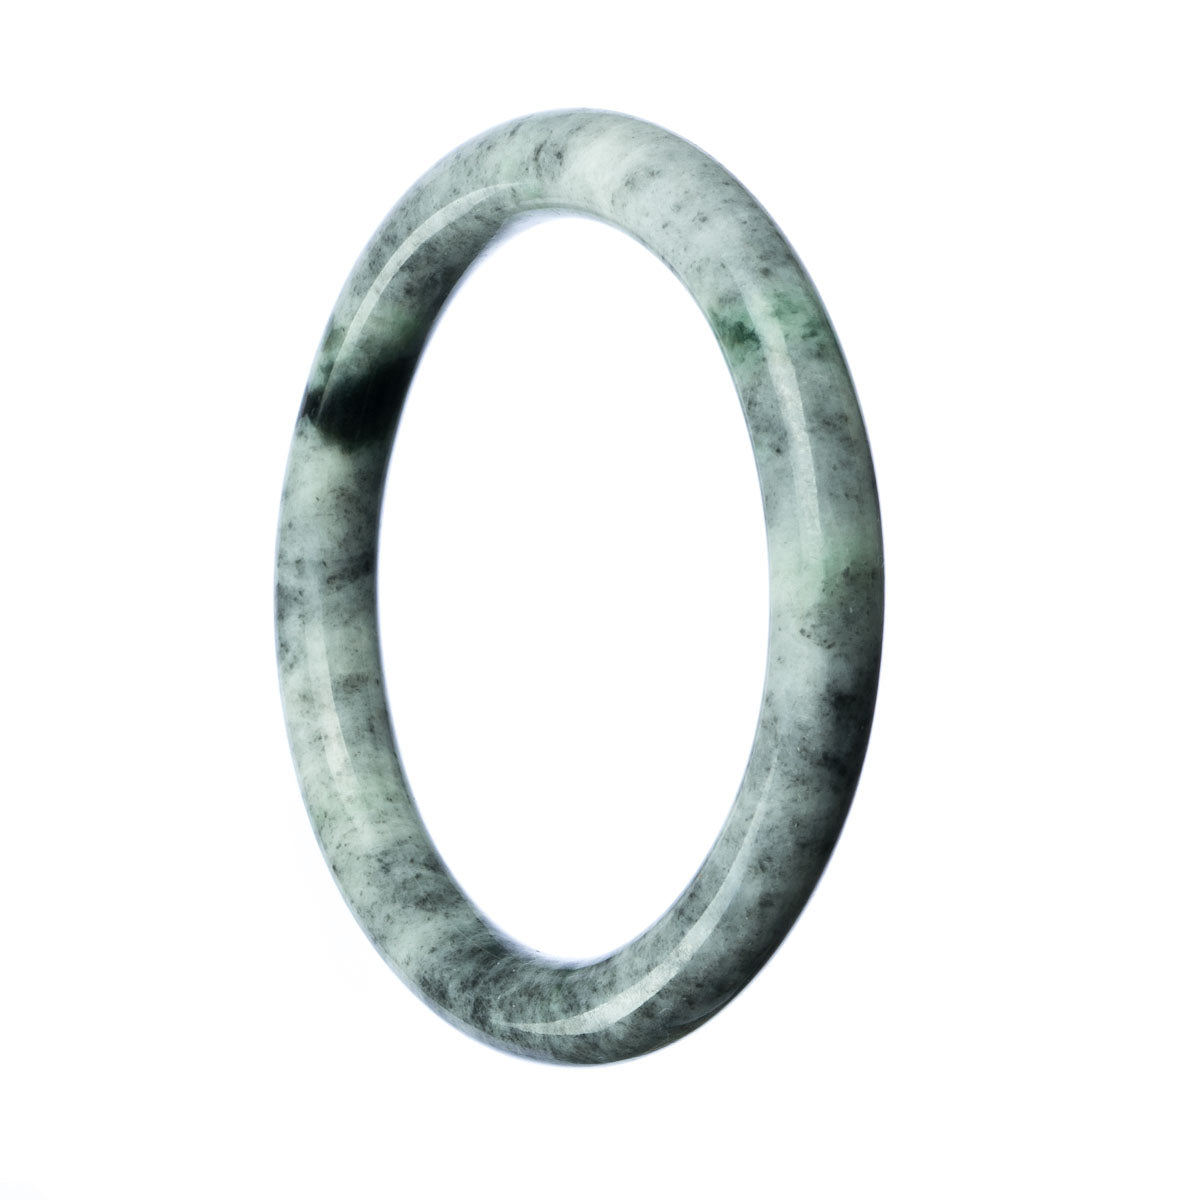 A round, real grade A grey green traditional jade bangle bracelet with a diameter of 58mm.